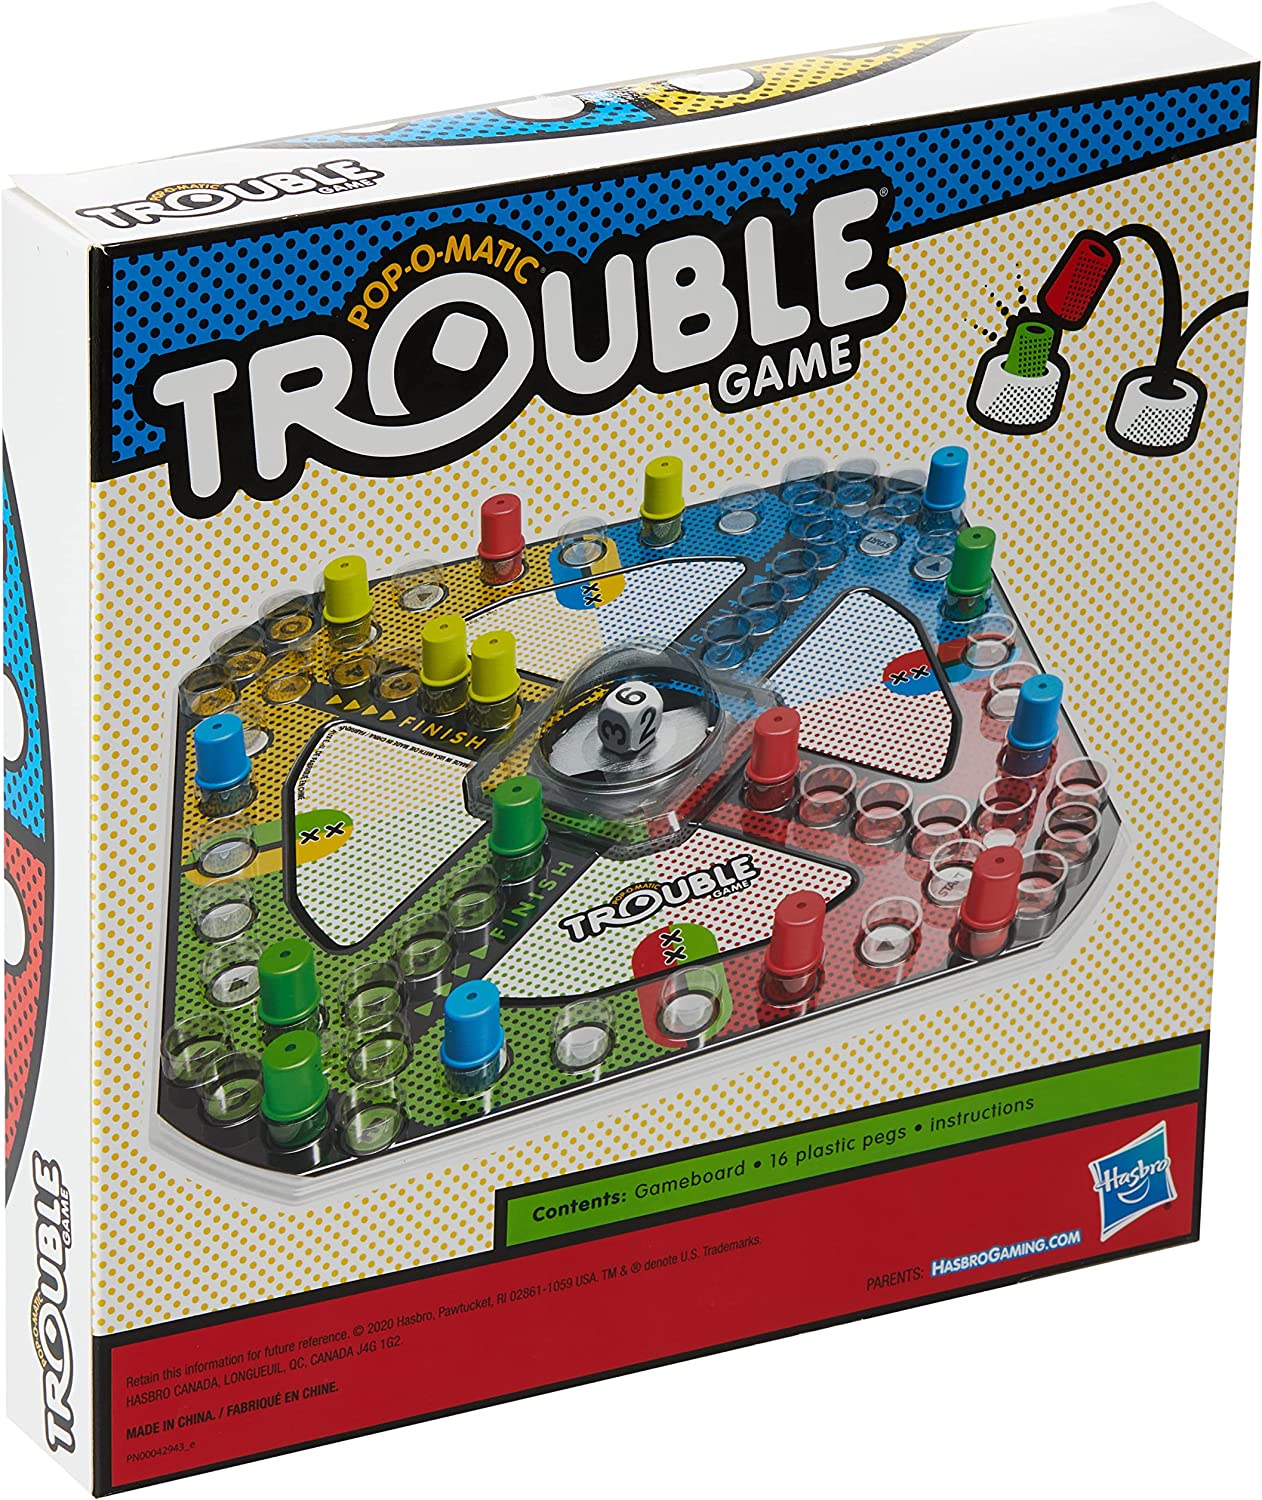 Hasbro Gaming Trouble Board Game, 2-4 Players - For Kids 5 Years and U –  AERii